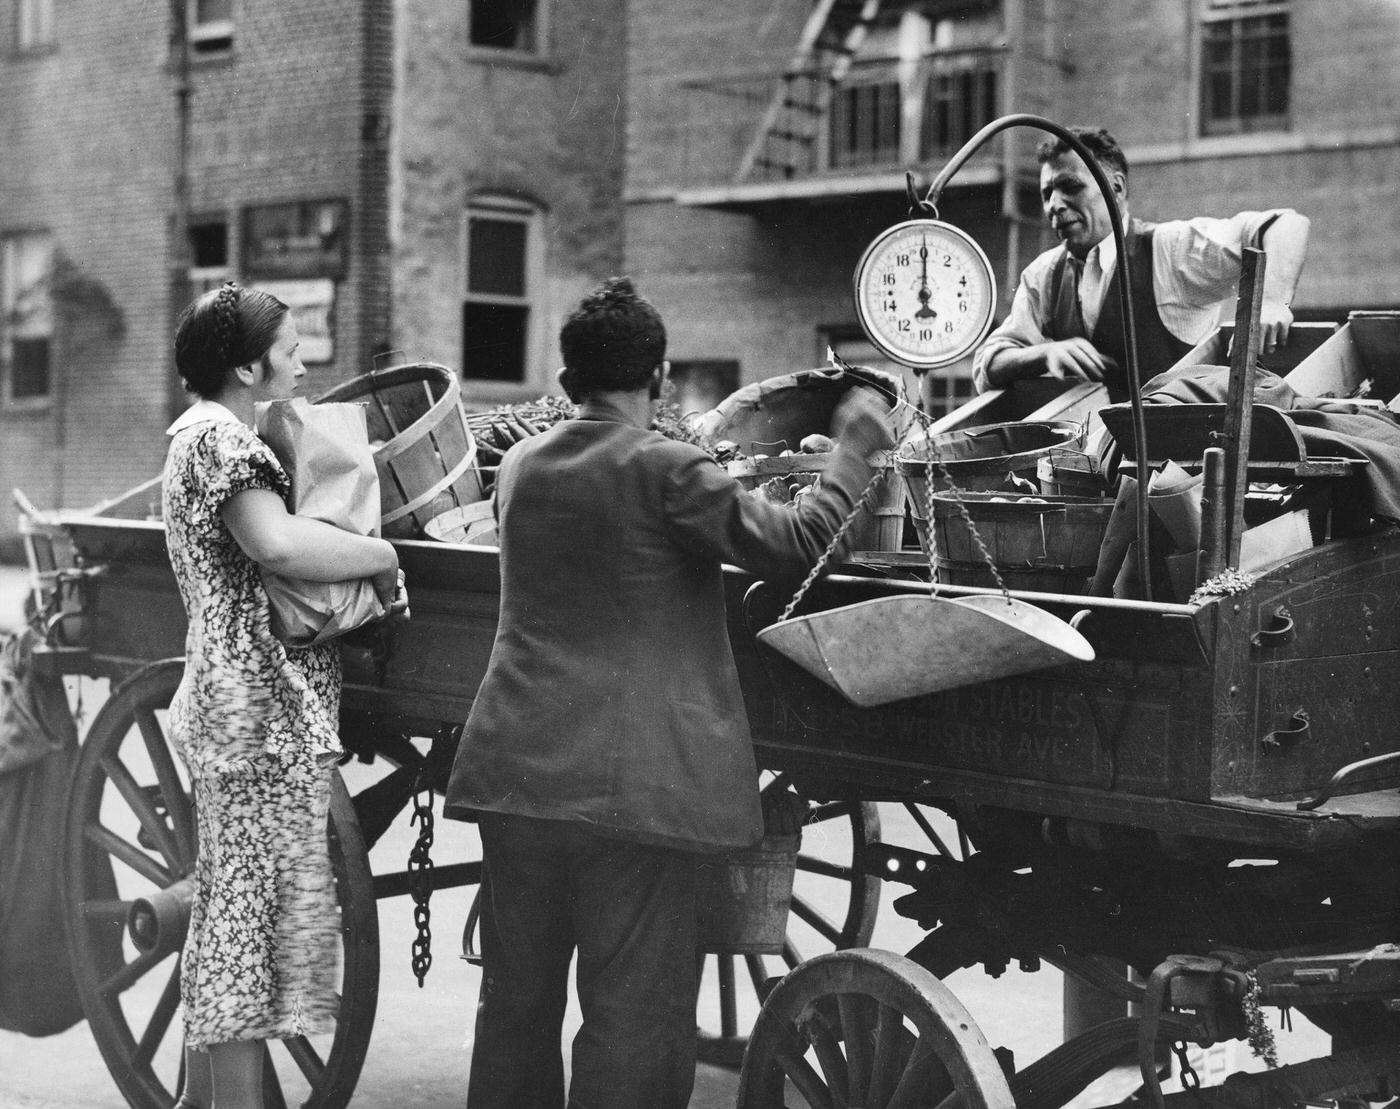 Two People Purchase Items From A Vendor On Manhattan'S Eastside, 1930S